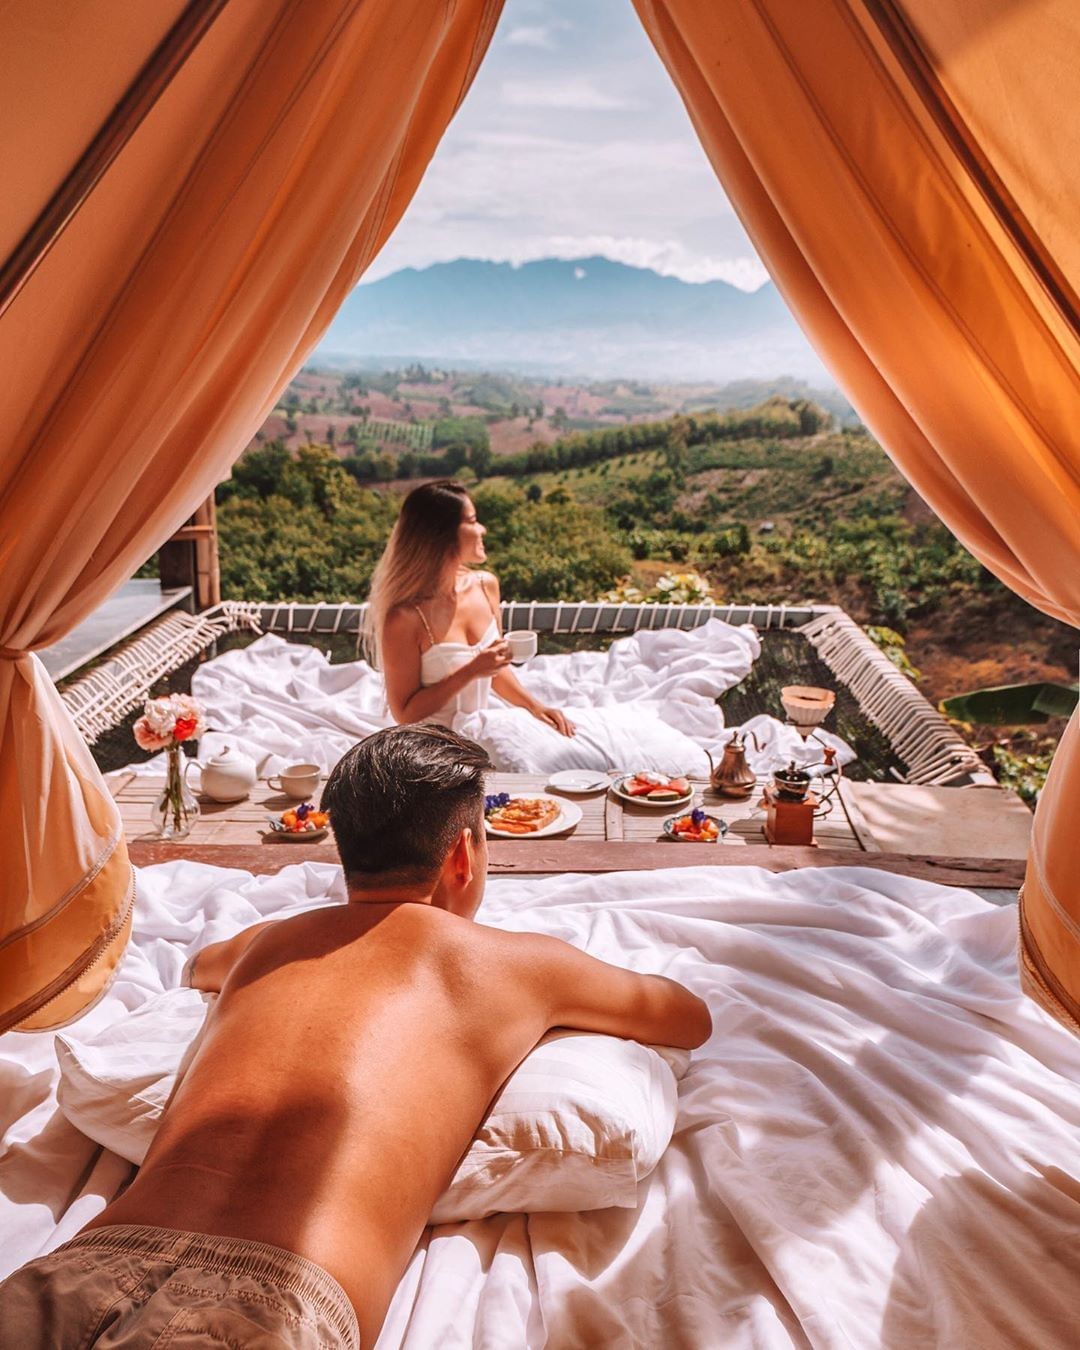 ZAFUL.com - Imagine waking up with this view with your love 🤤🌄⠀ Regram@couple 👫 Pic by @paigunna⁣
⁣
.⁣
⁣
⁣
⁣
#ZAFUL #ZAFULinspo #lifestyle #travel#travelcouple